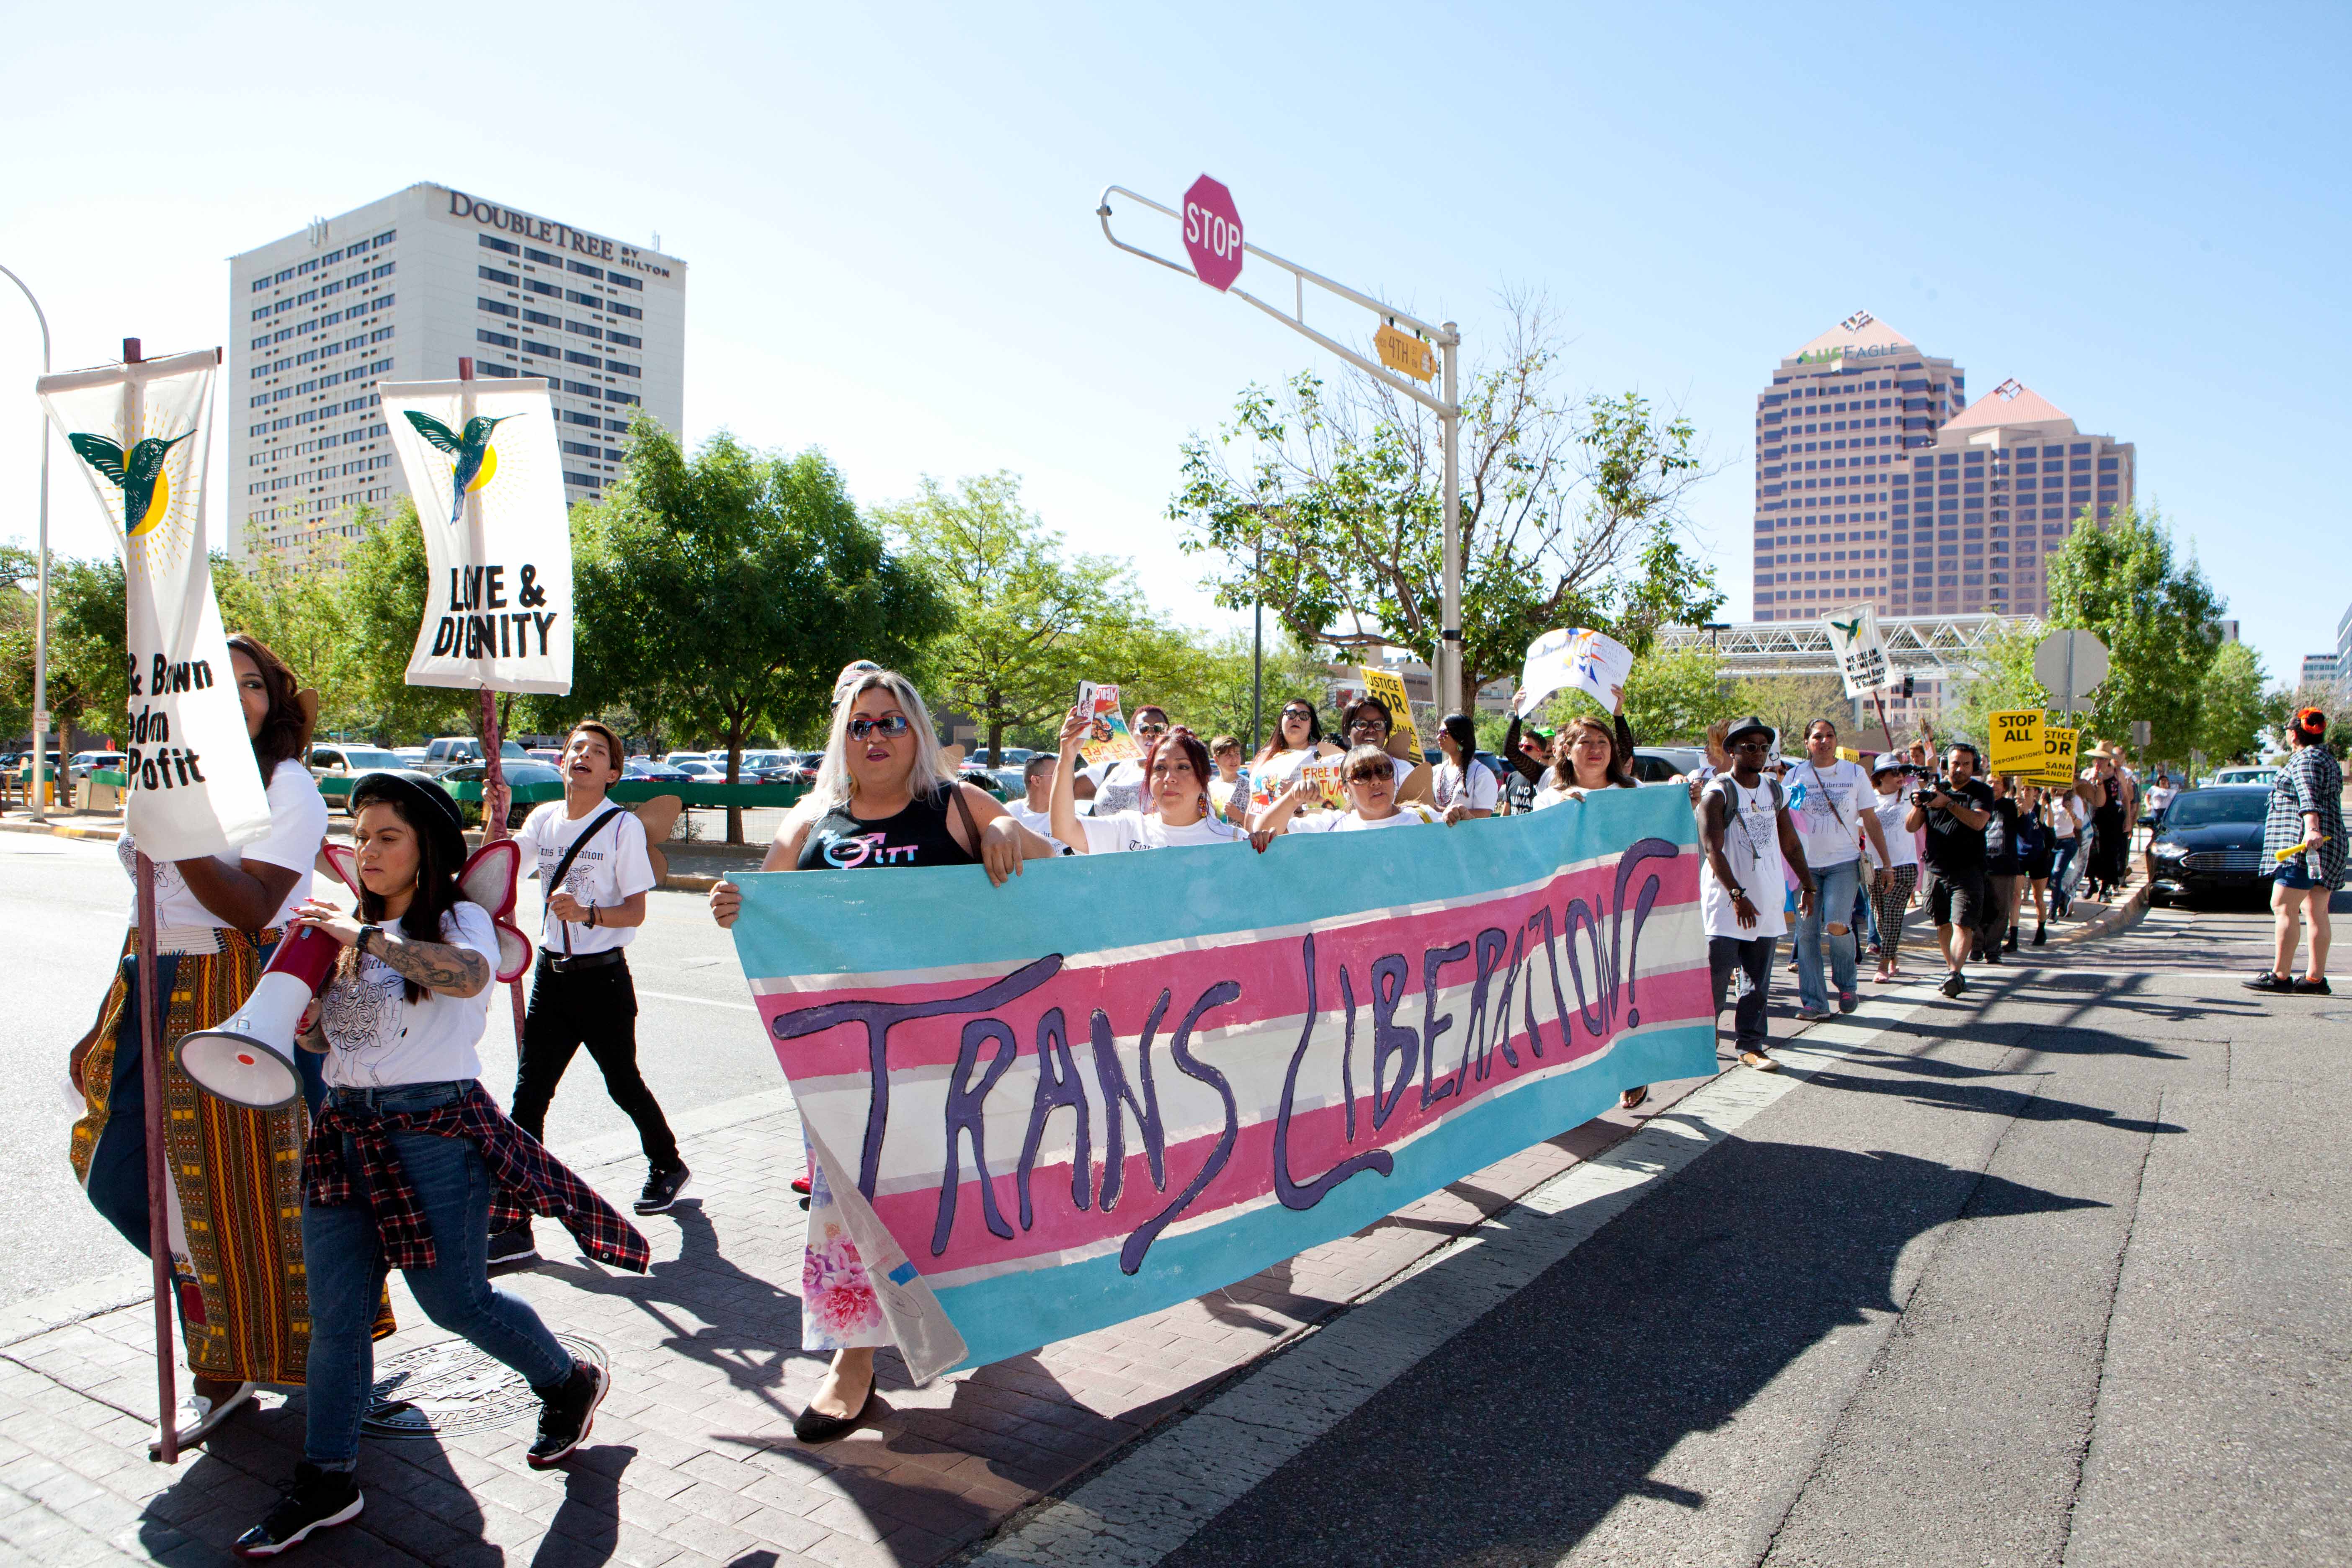 Line of Black and brown transgender people march with banner reading "Trans Liberation" and signs with hummingbirds and text "Love & Dignity" and "Black & Brown Freedom over Profit"